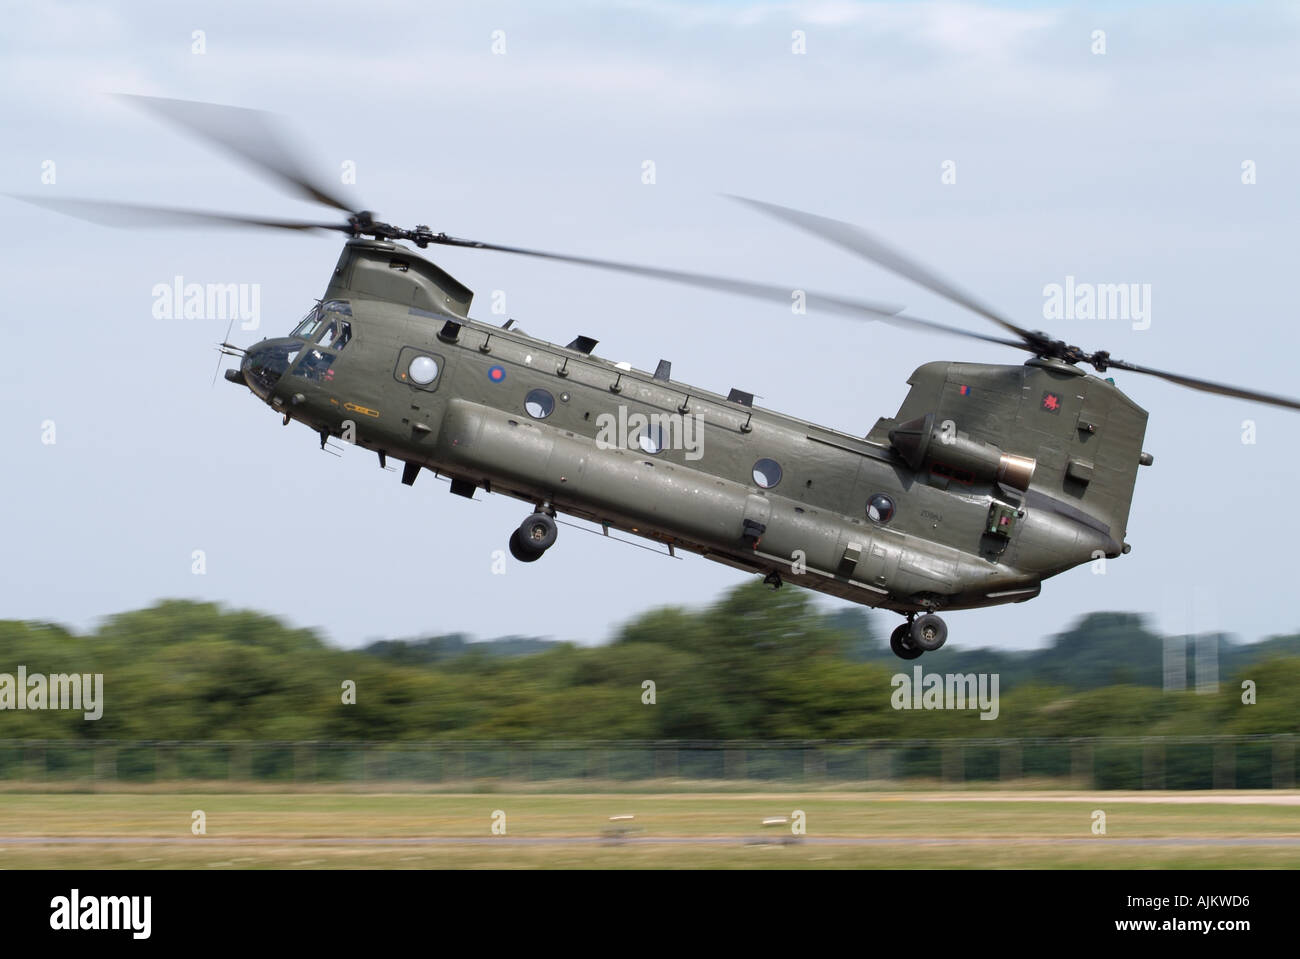 Boeing Chinook makes a tactical landing at Fairford Stock Photo